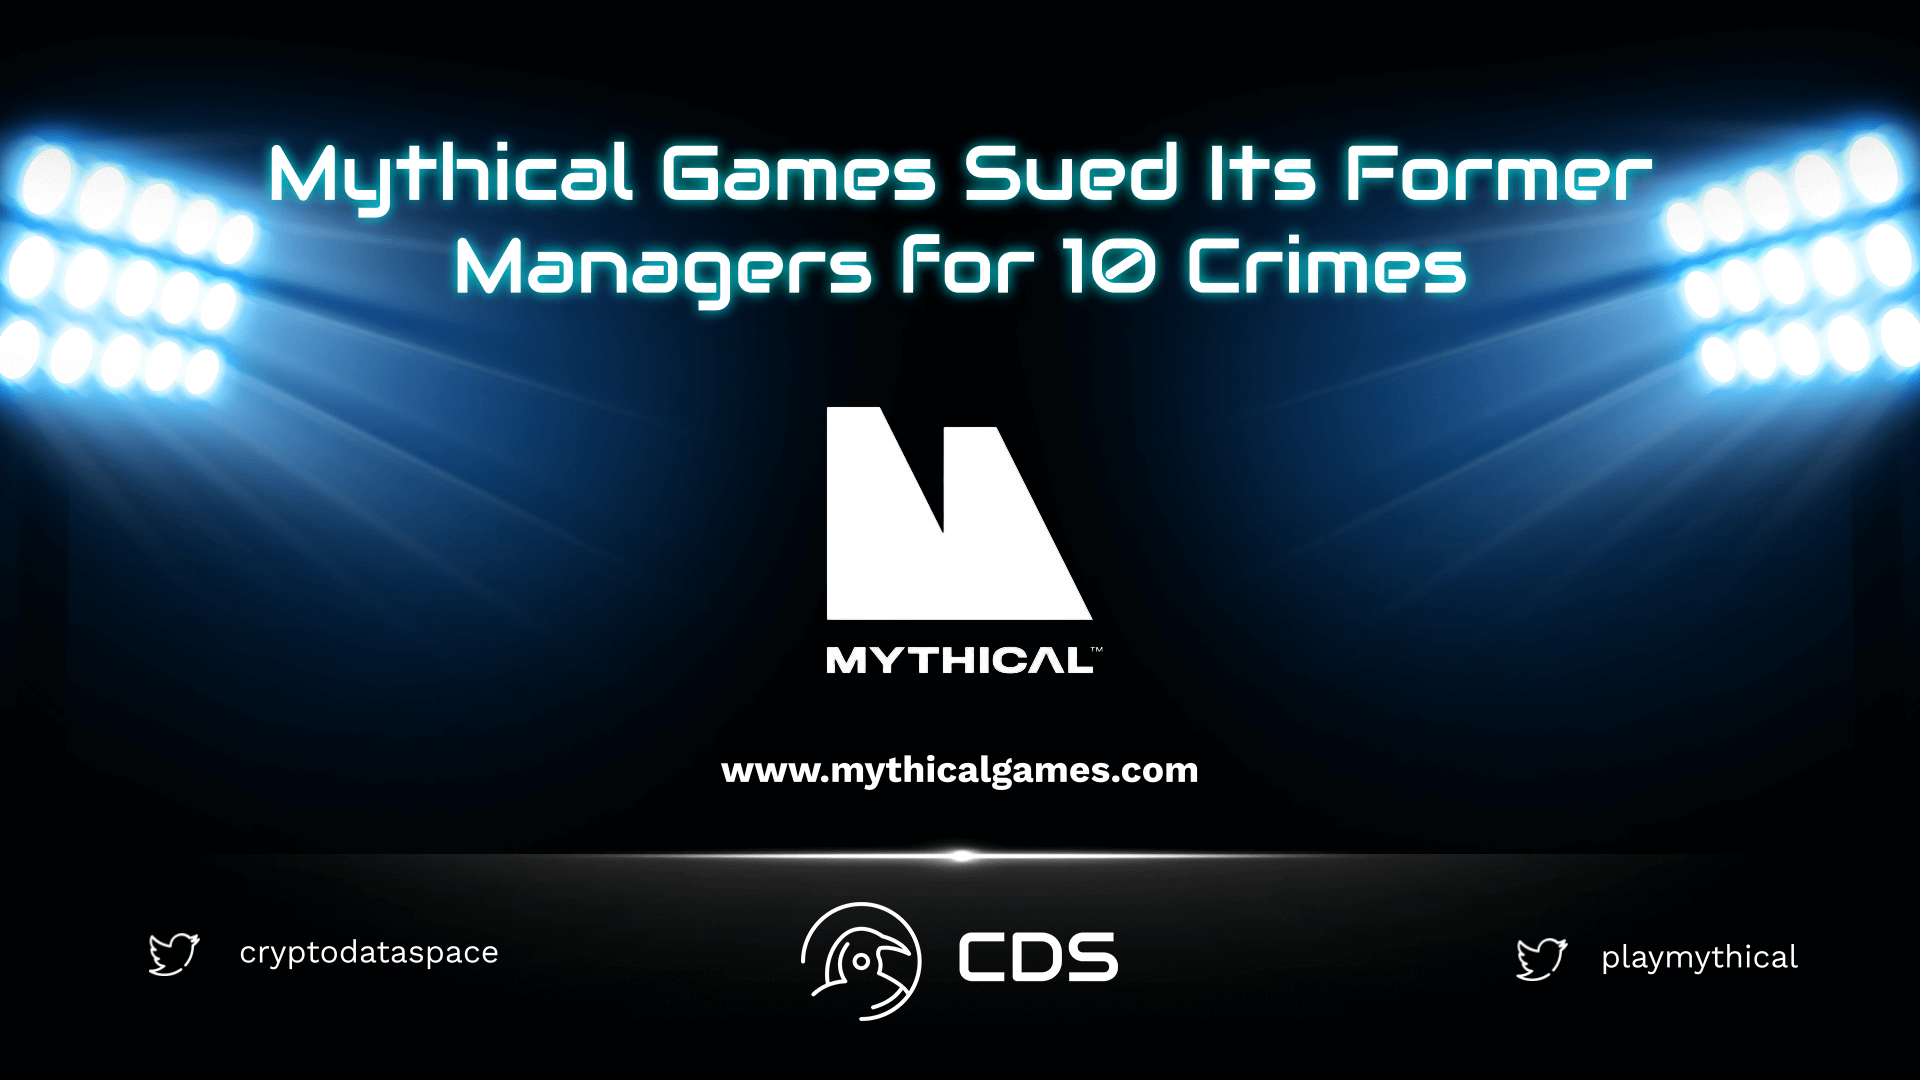 Mythical Games Sued Its Former Managers for 10 Crimes